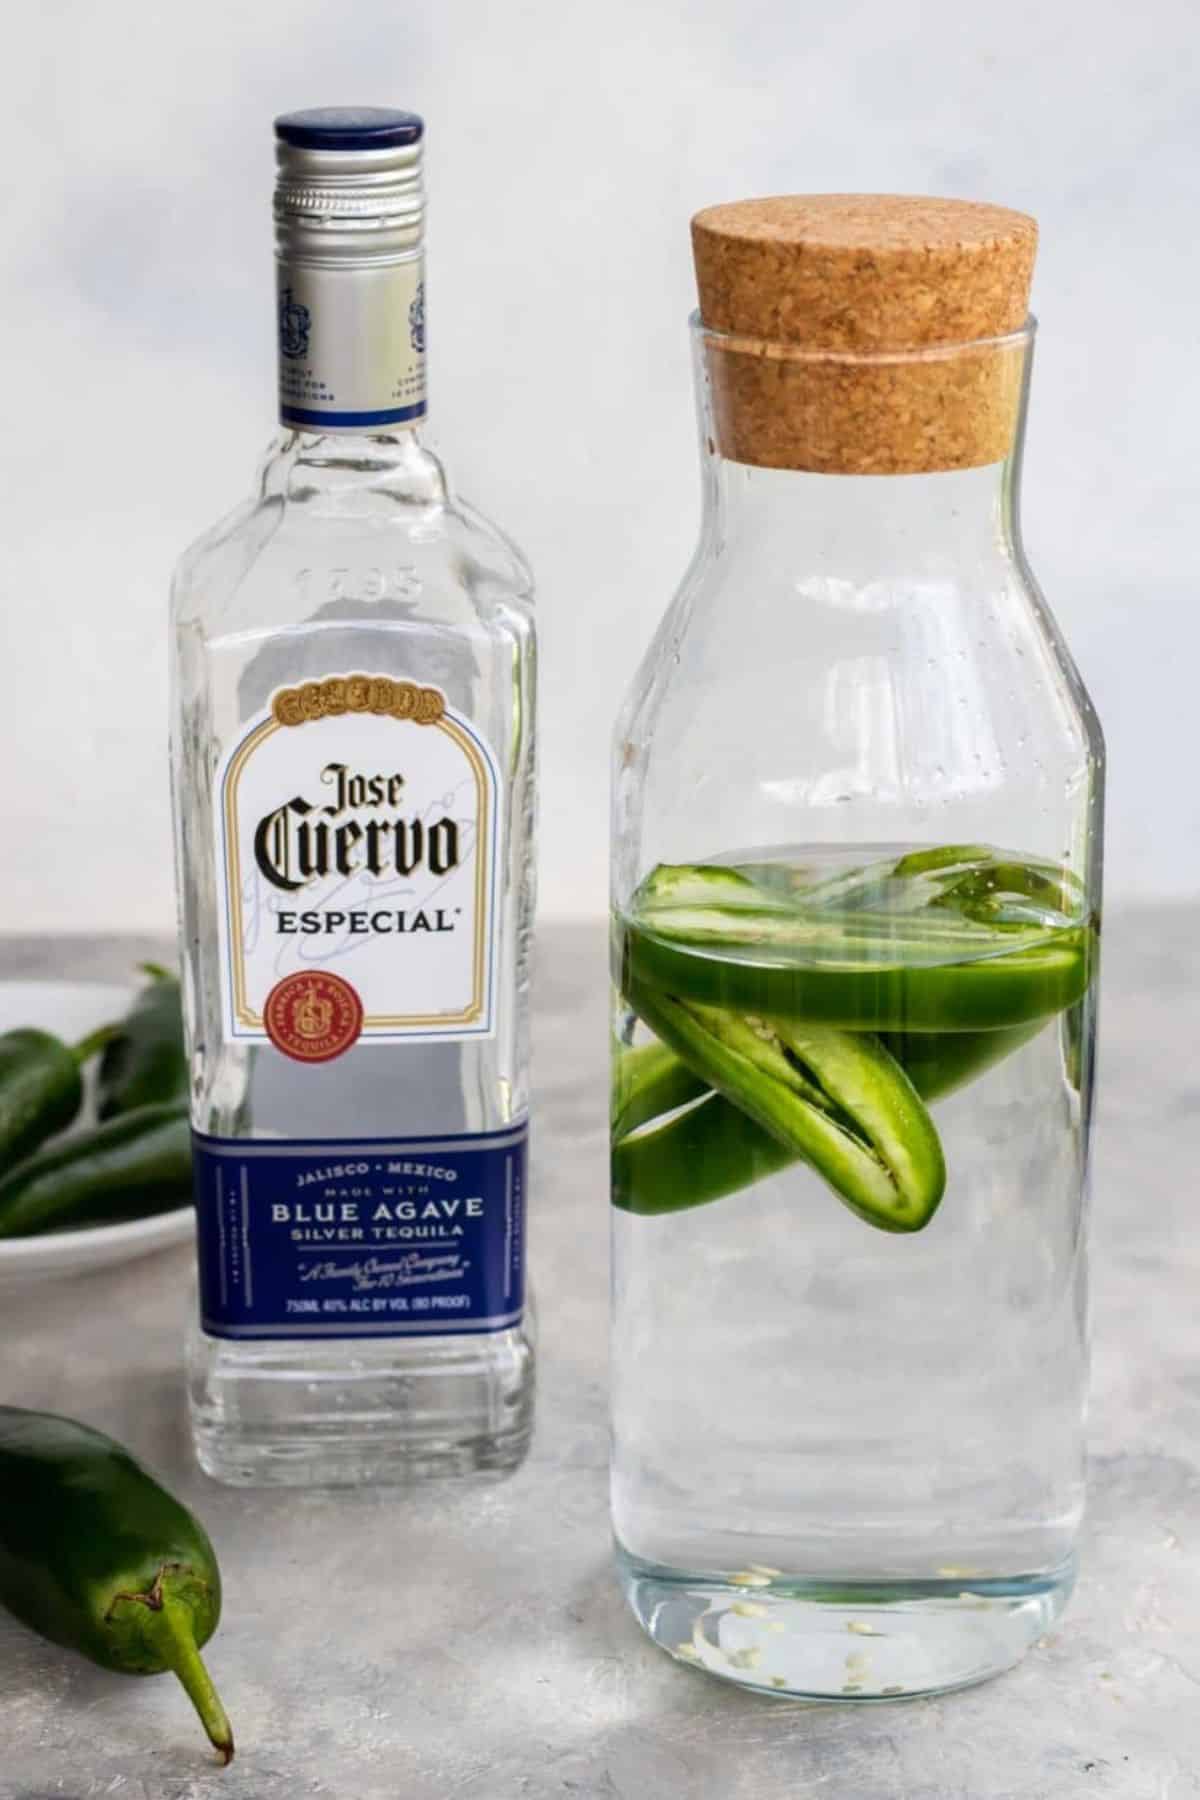 jalapeno tequila in a bottle with a bottle of jose cuervo in the background